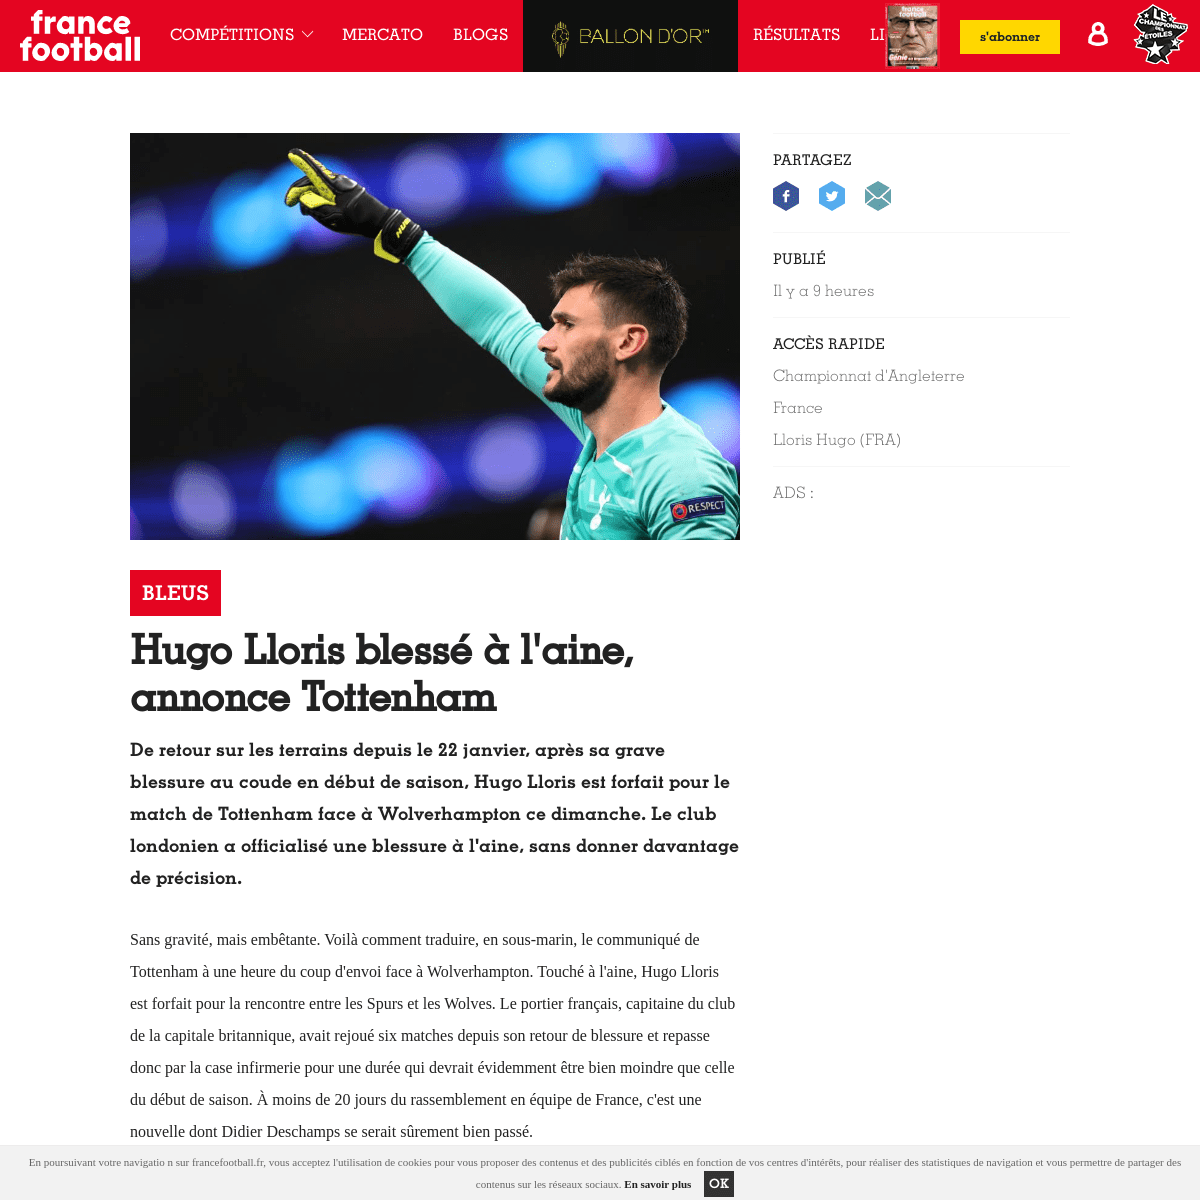 A complete backup of www.francefootball.fr/news/Hugo-lloris-blesse-a-l-aine-annonce-tottenham/1115117